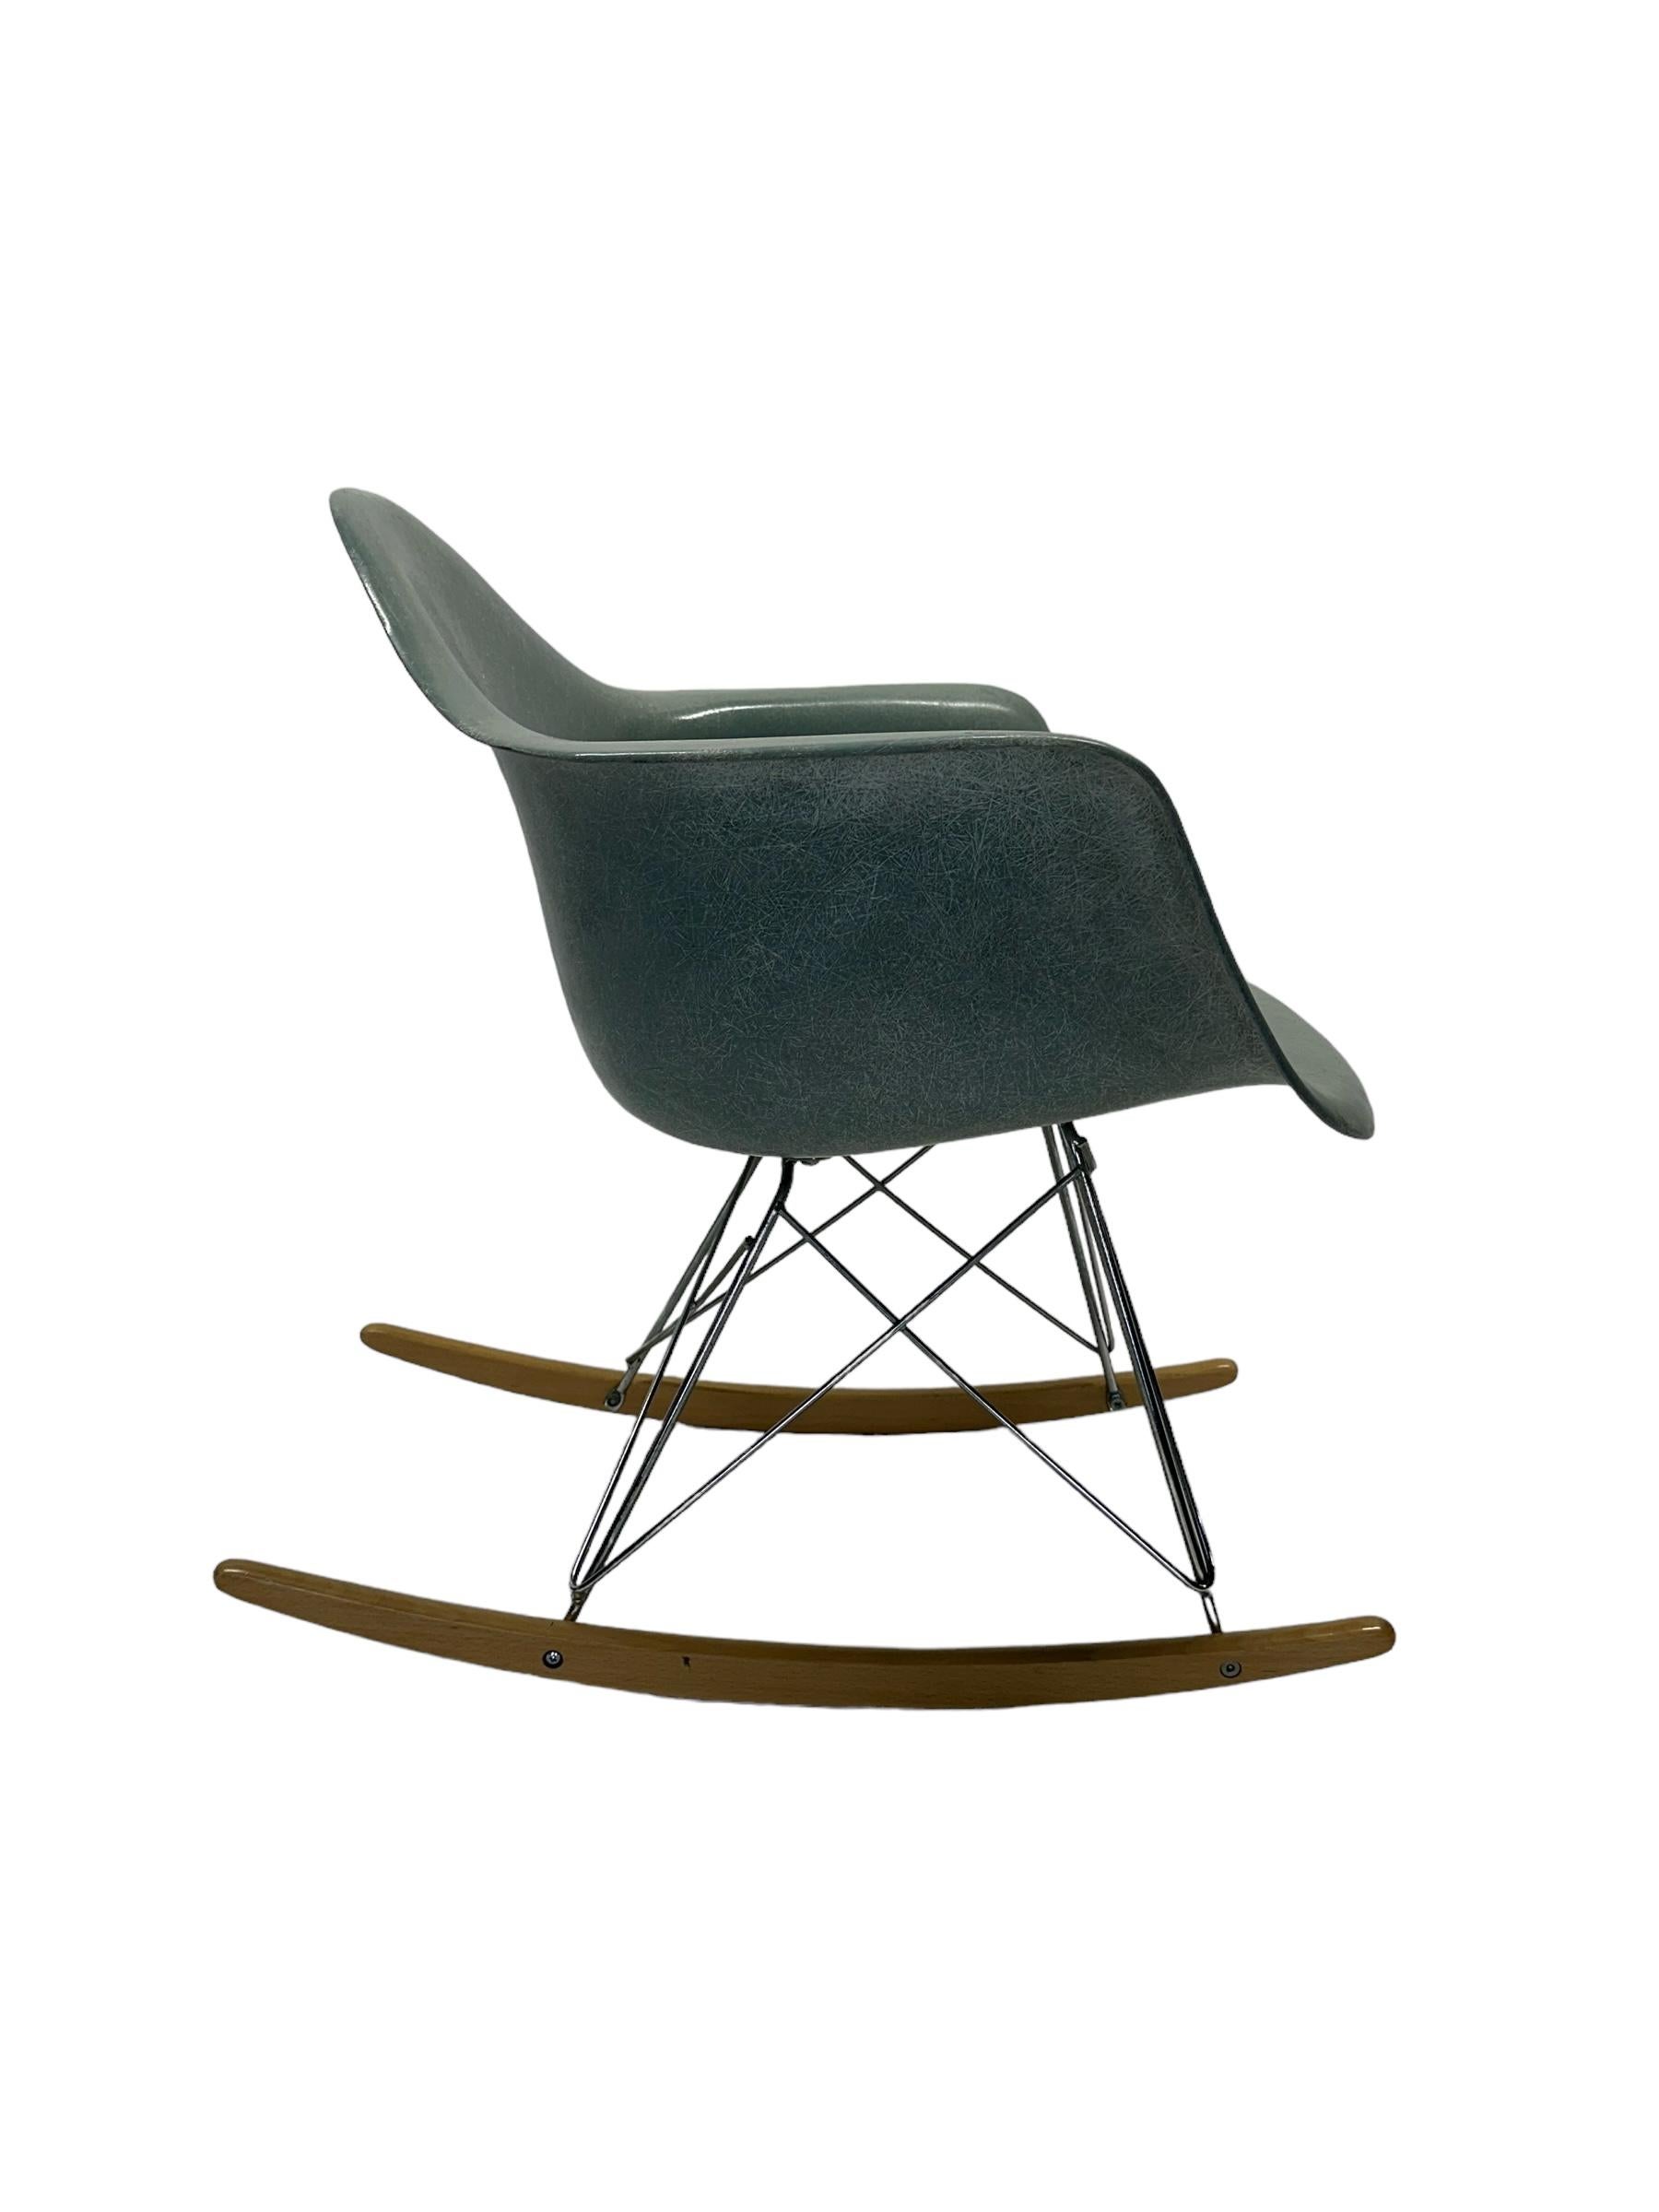 Herman Miller Eames RAR Rocking Chair In Good Condition For Sale In Brooklyn, NY